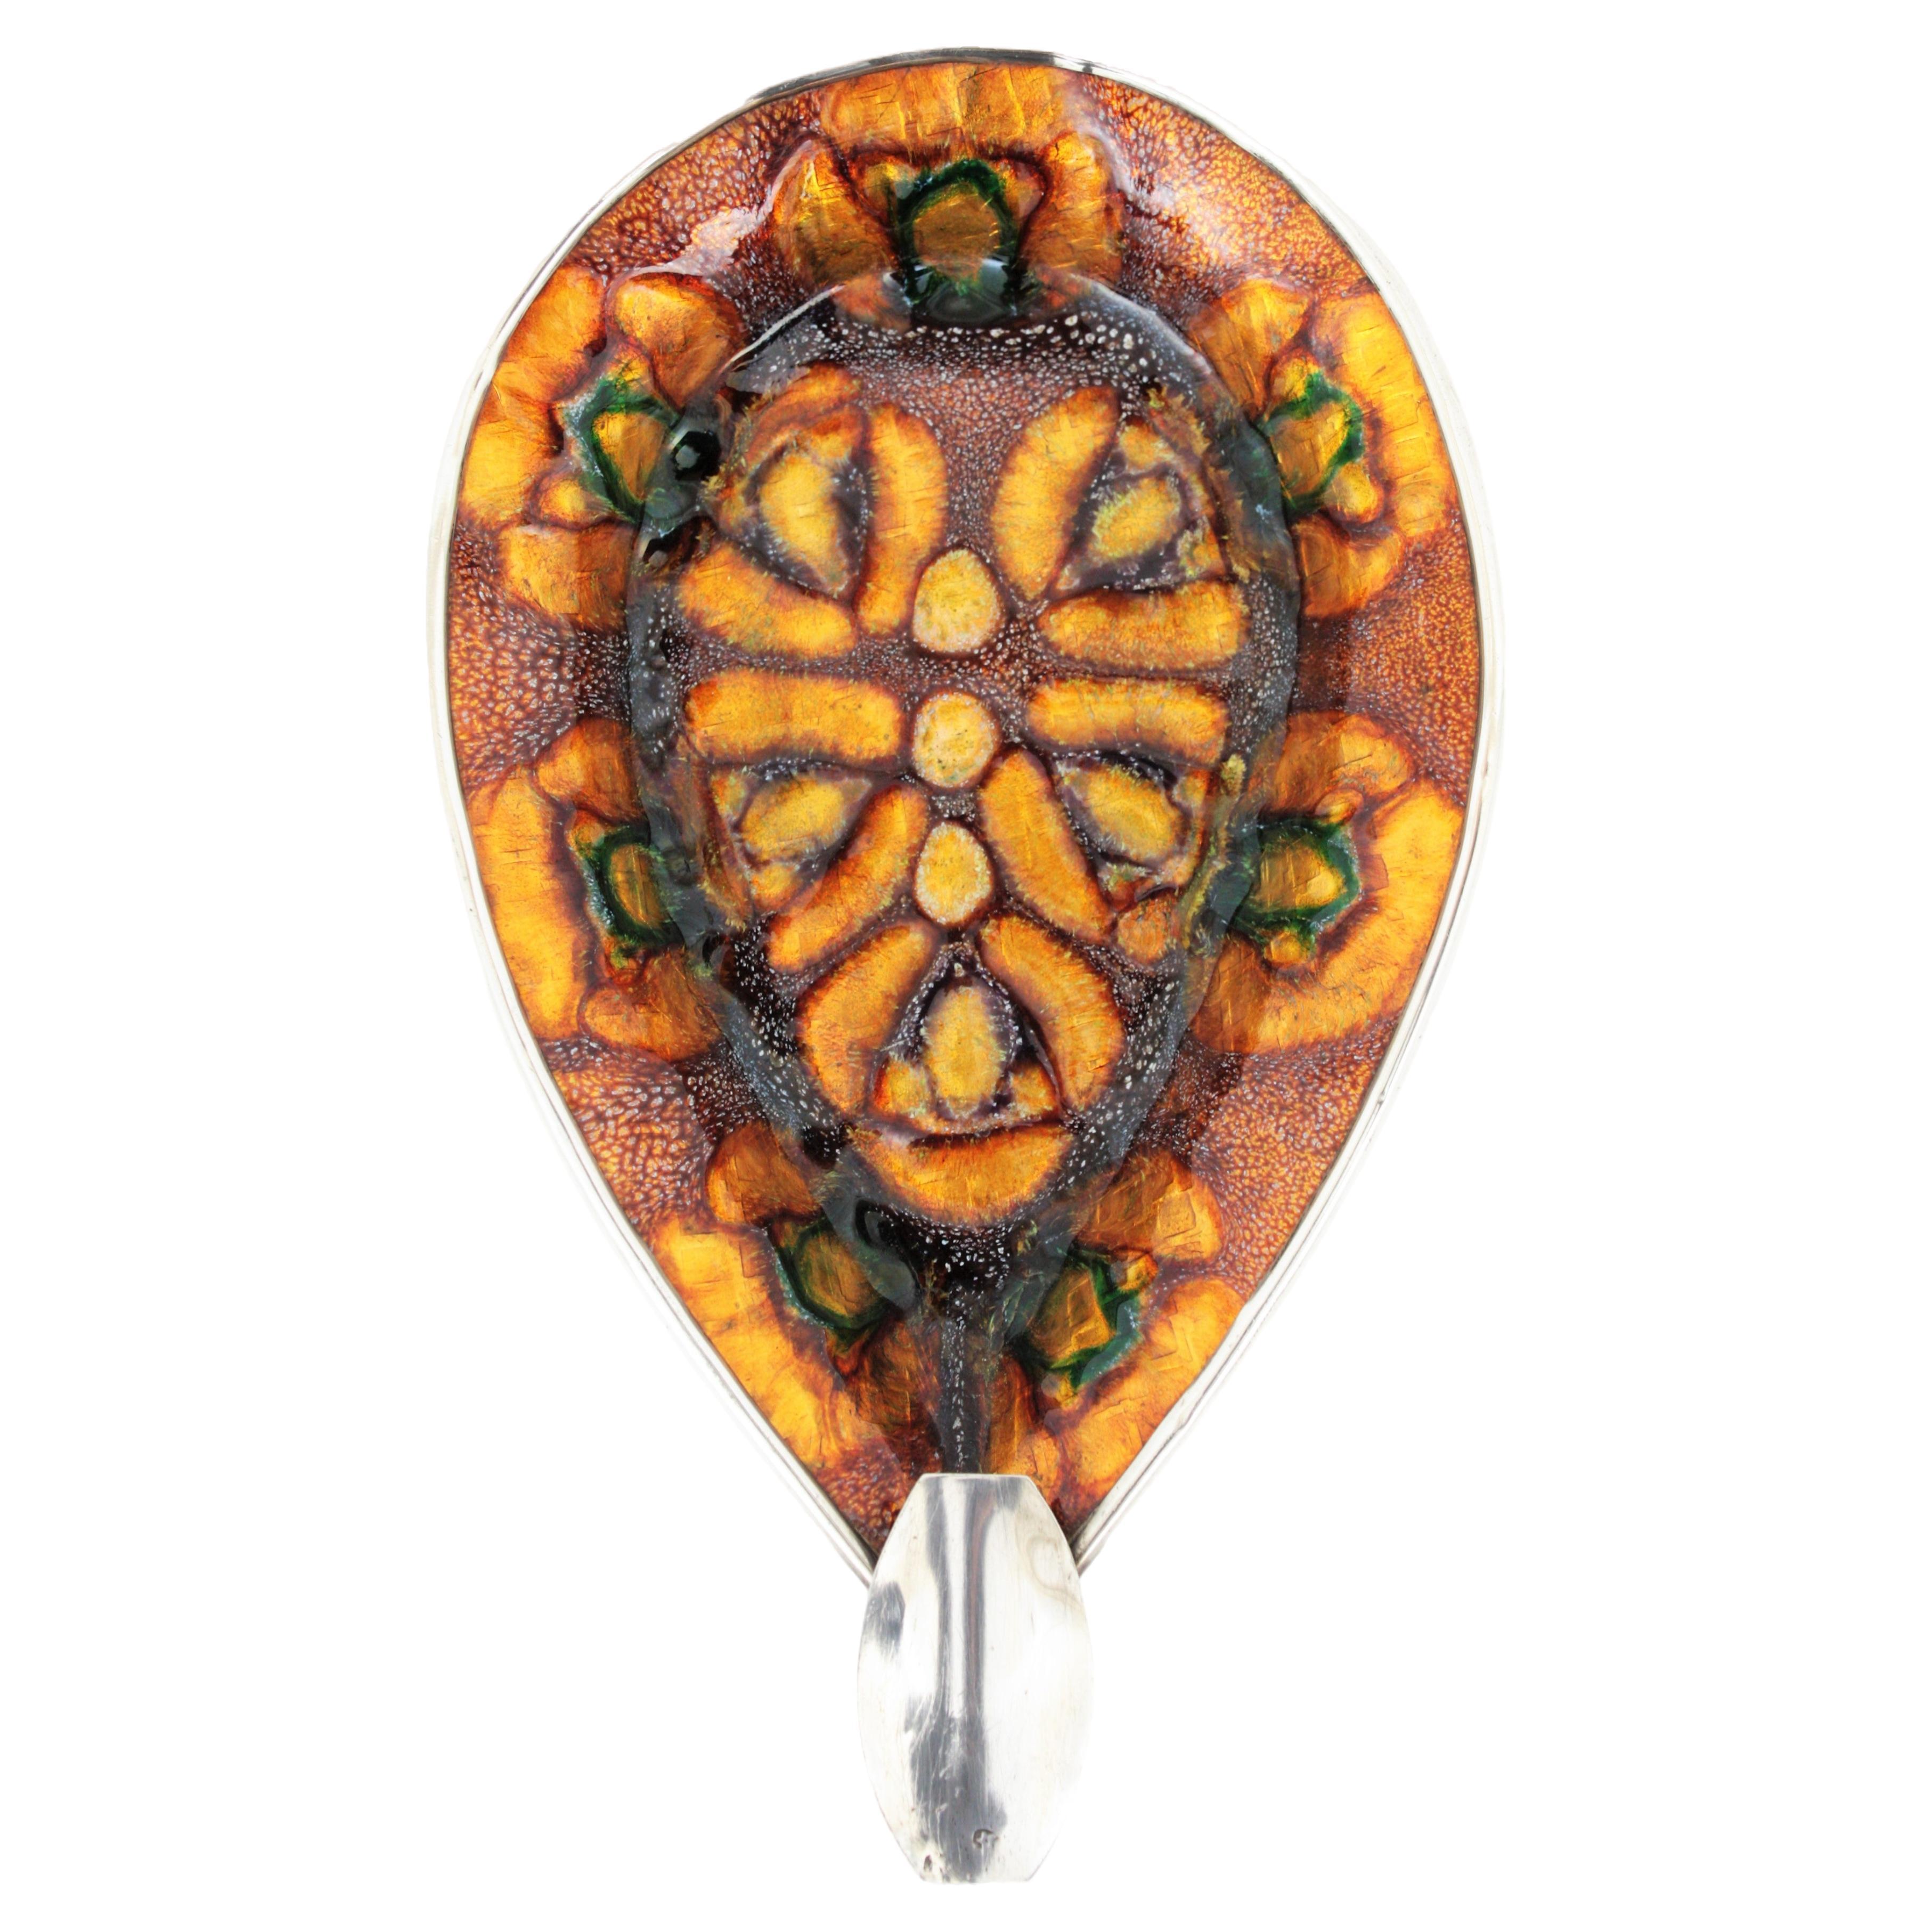 Sterling silver and enamel tear drop ashtray with silver flecks, Spain, 1950s
Beautiful sterling silver tear drop shaped ashtray covered by enamel with a floral design in orange, yellow, amber and green colors and silver flecks inclusions.
Useful as